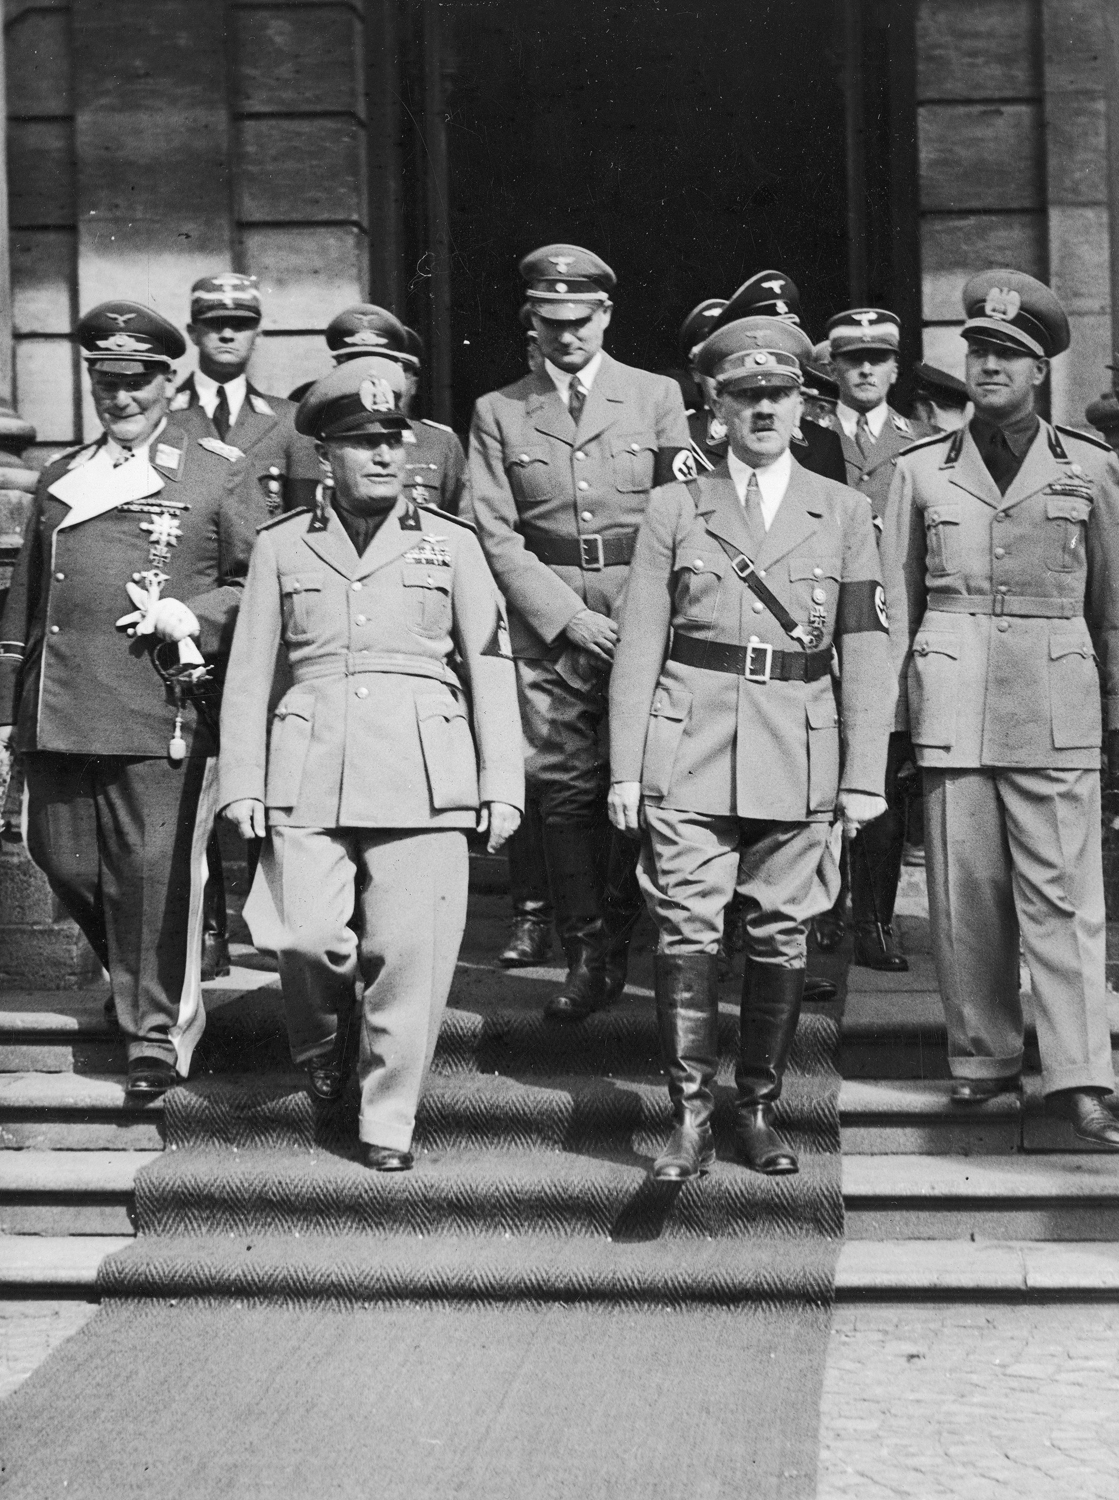 Benito Mussolini, Adolf Hitler, Hermann Göring, Heinrich Himmler and Galeazzo Ciano Munich Conference